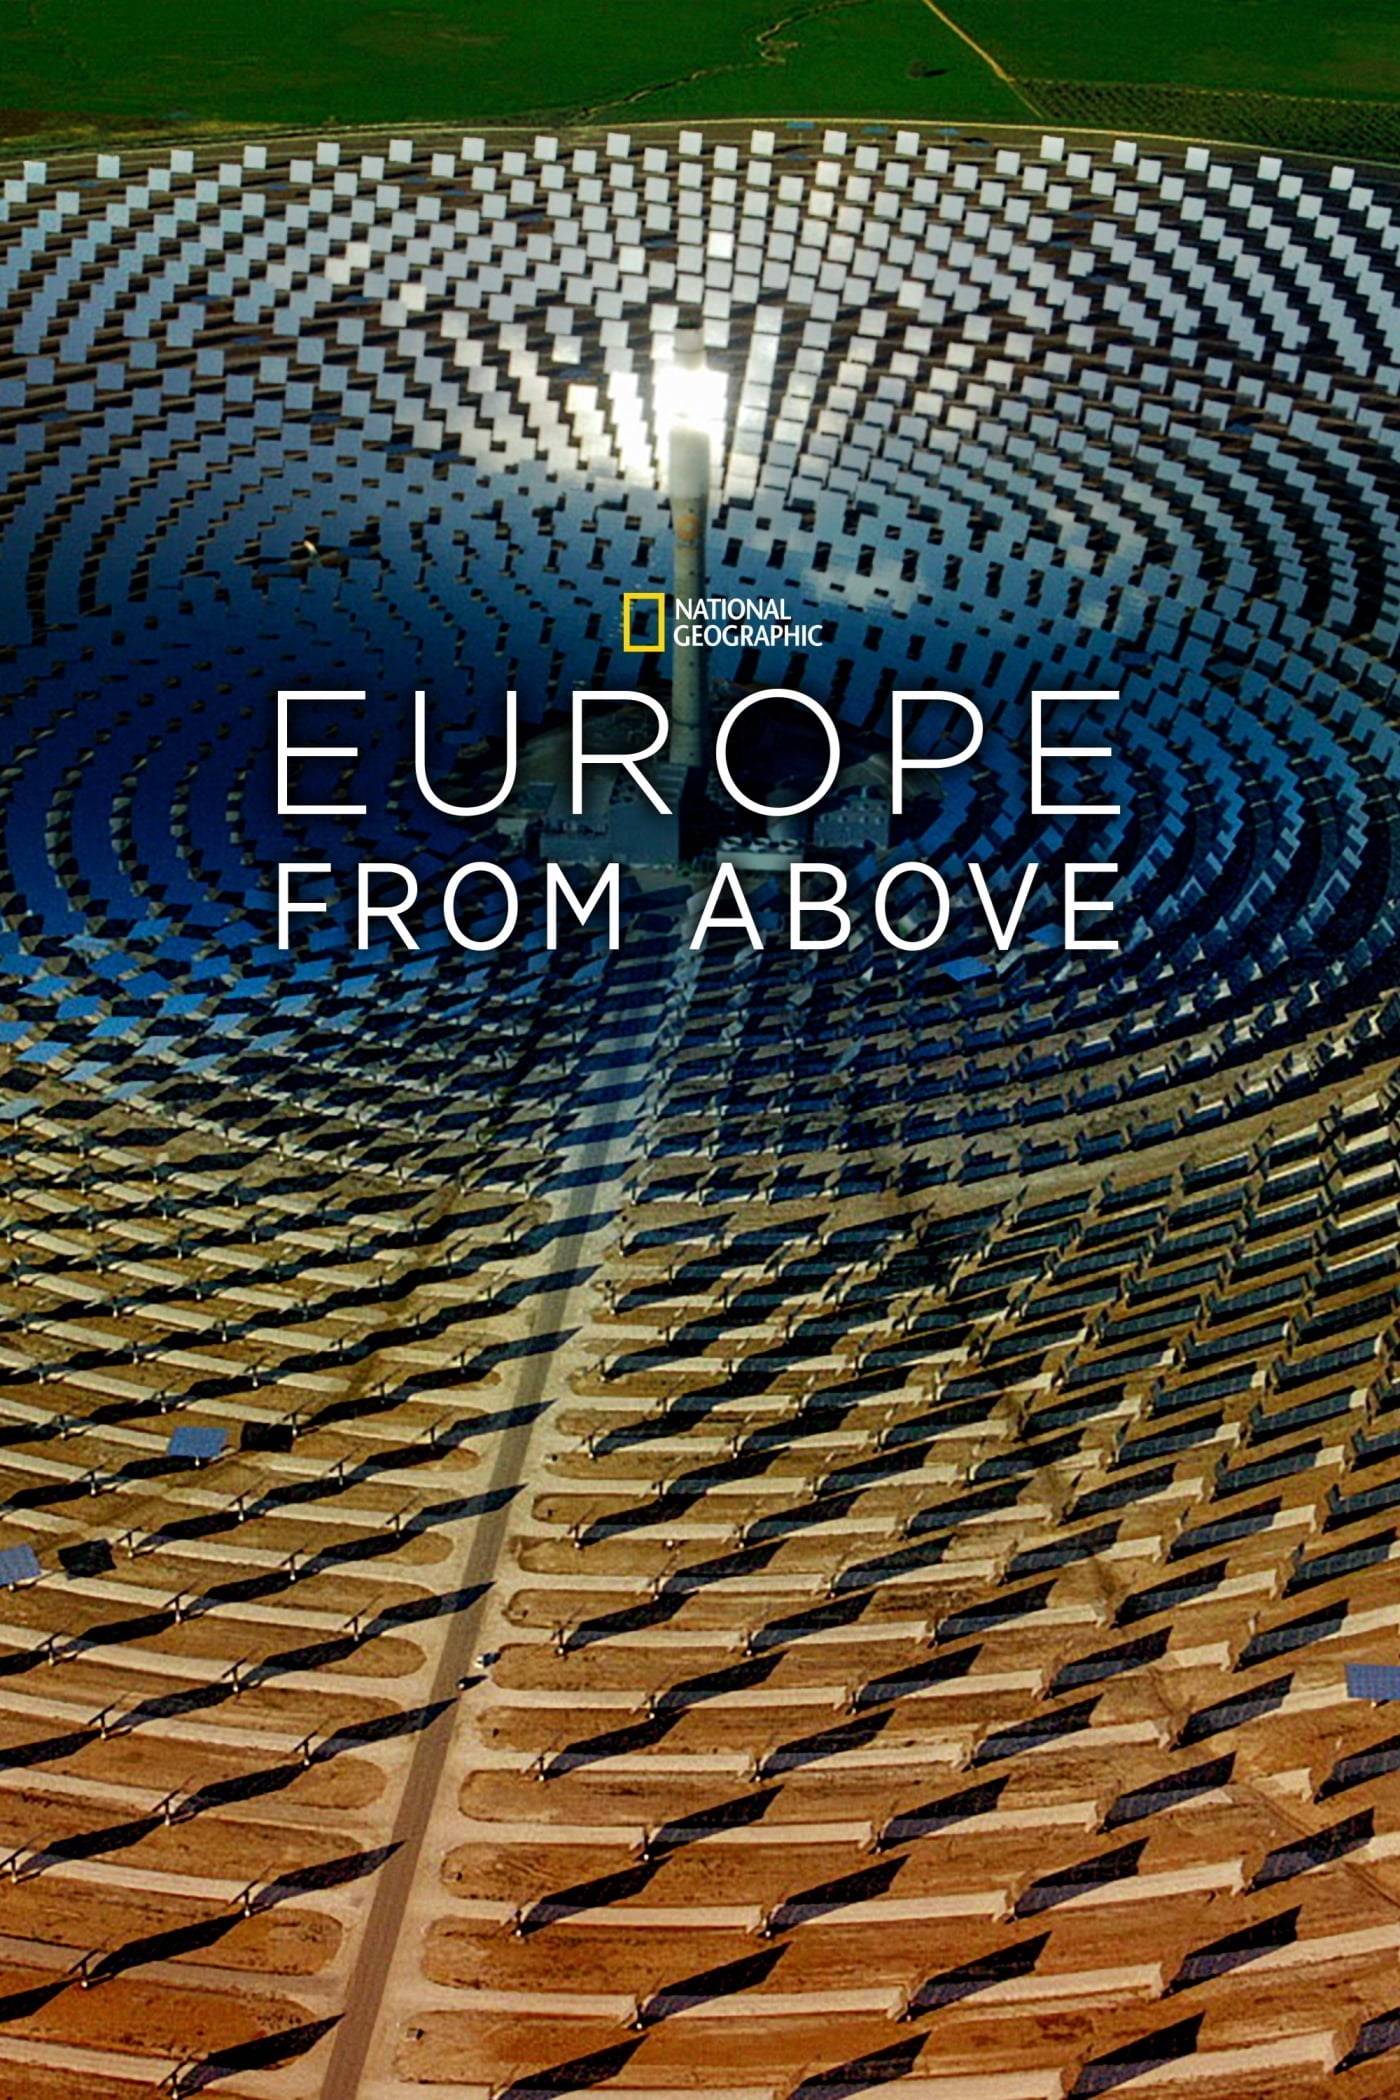 Europe From Above - Seizoen 02 - 720p WEB-DL DDP5 1 H 264 (Retail NLsub)